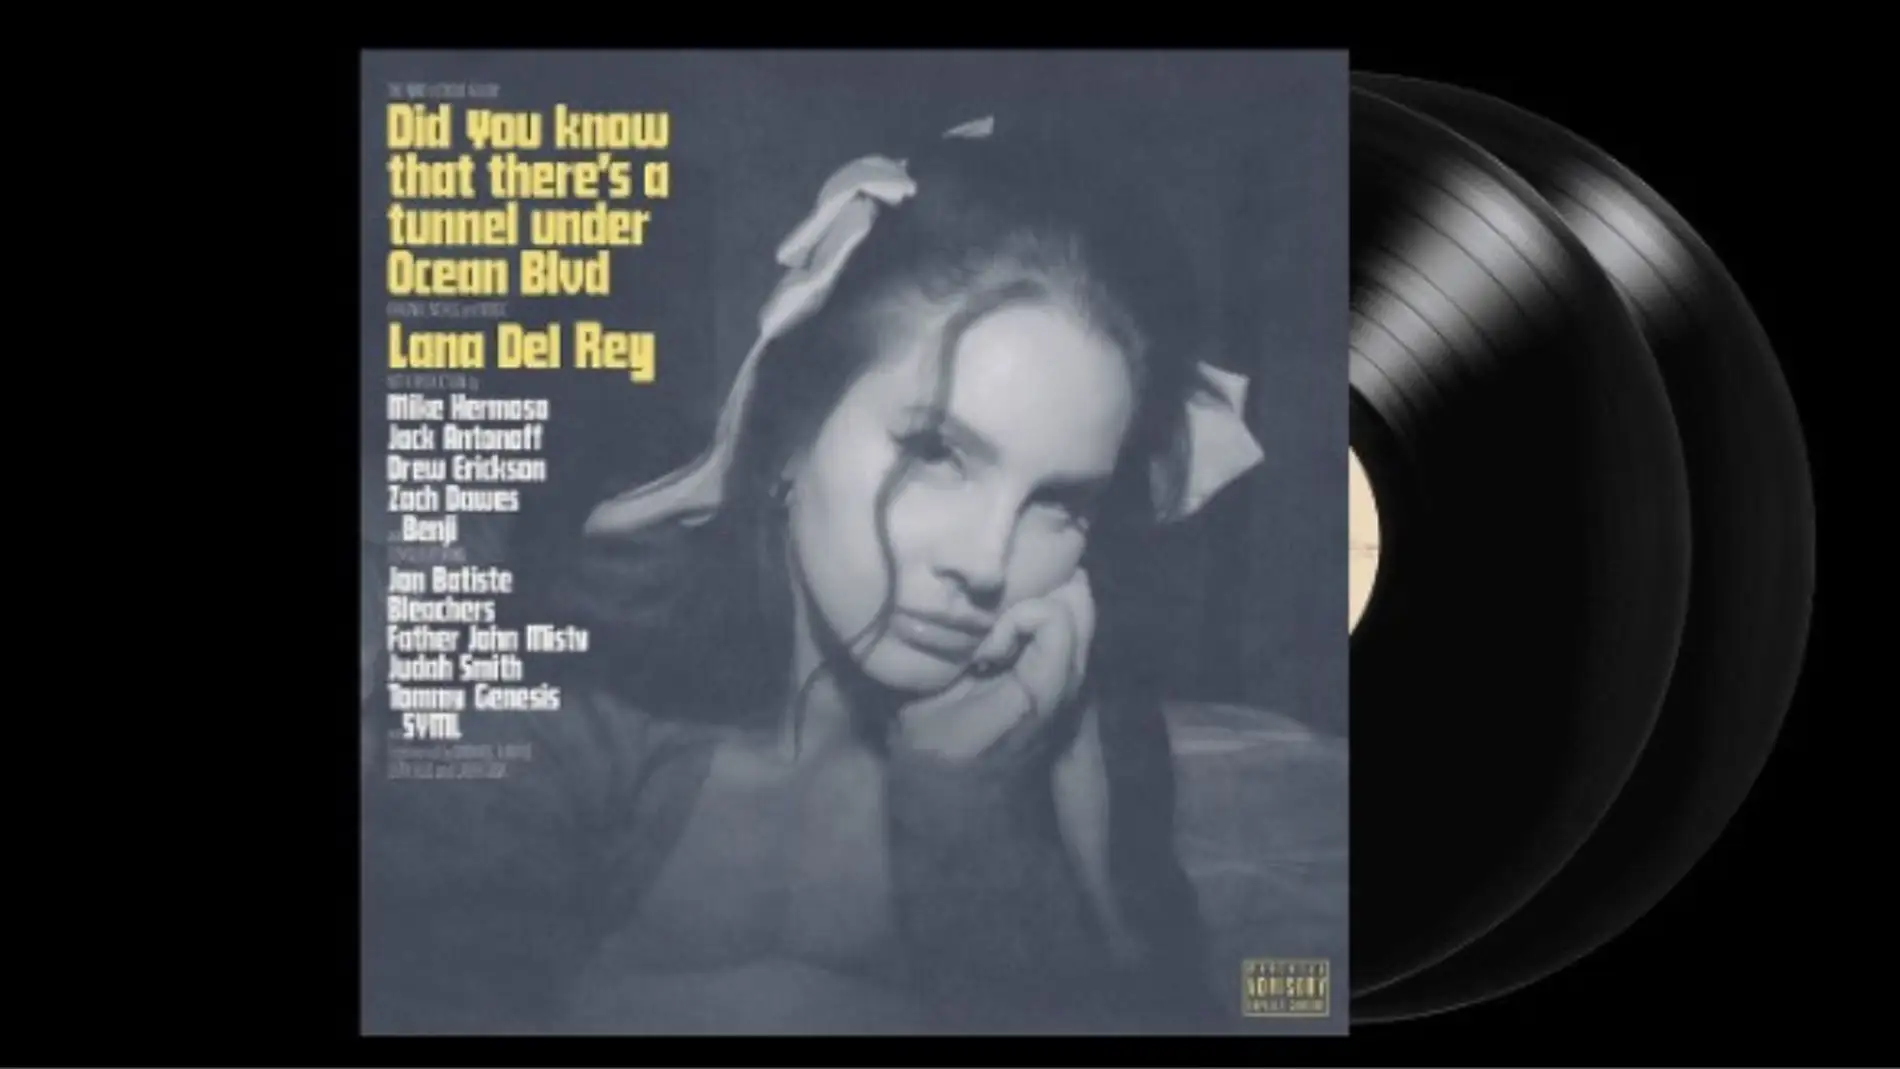 Lana del Rey anuncia su disco 'Did you know that there's a tunnel under Ocean Blvd' 